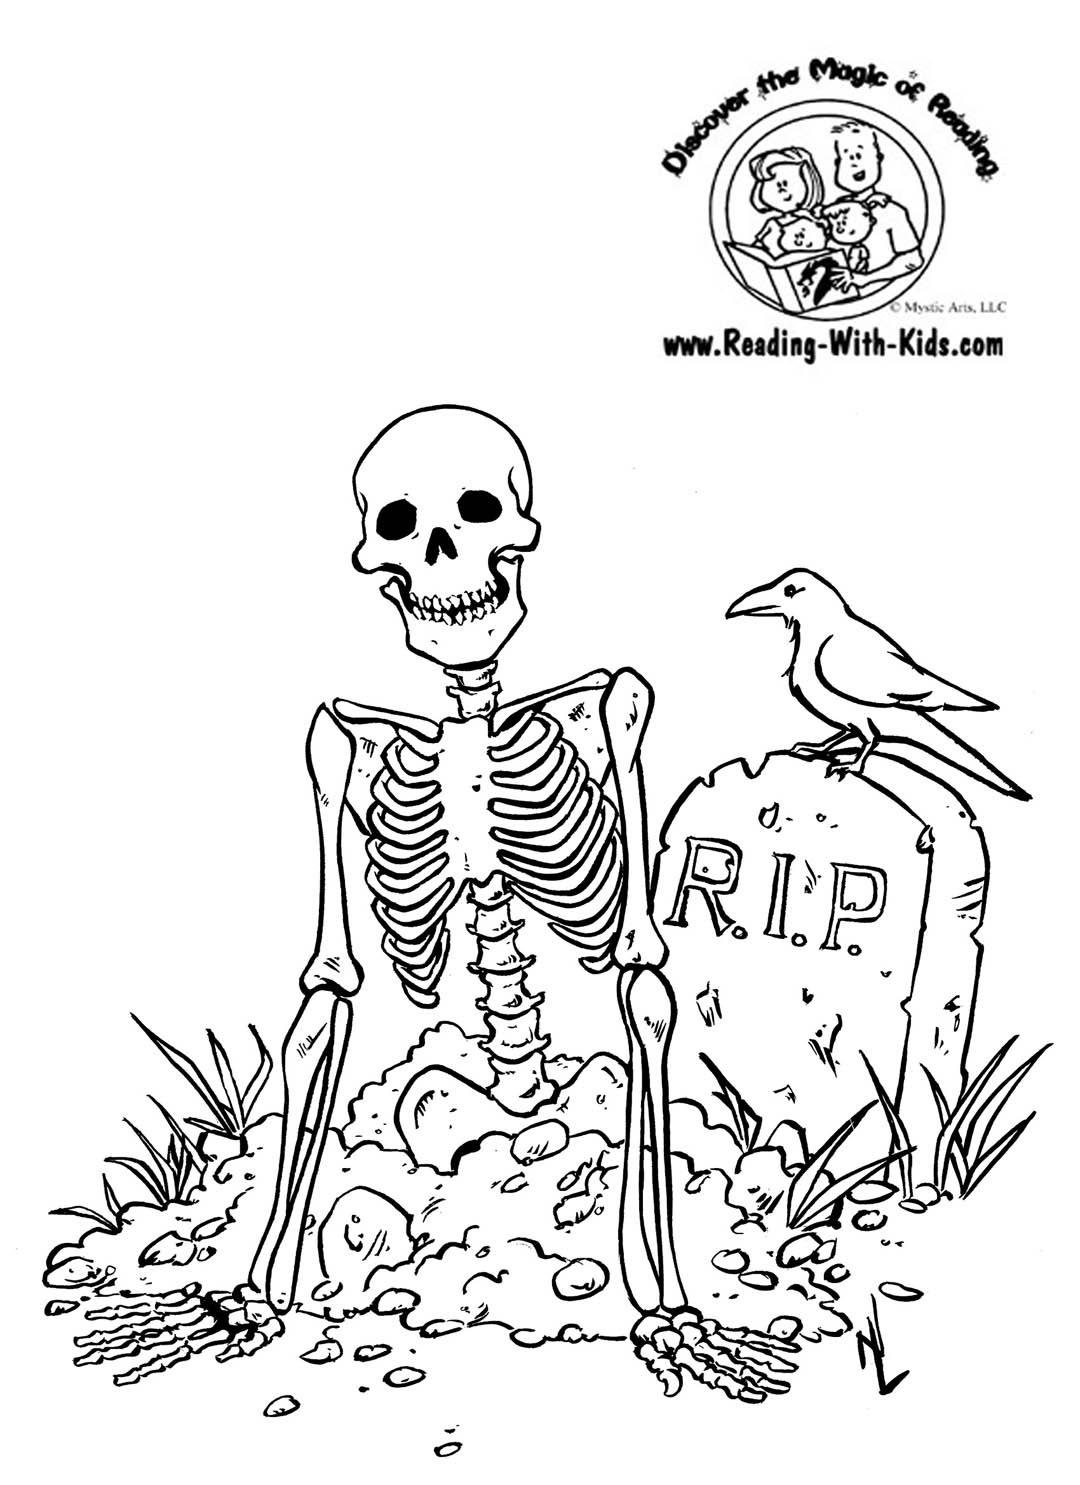 Skull Halloween coloring pages